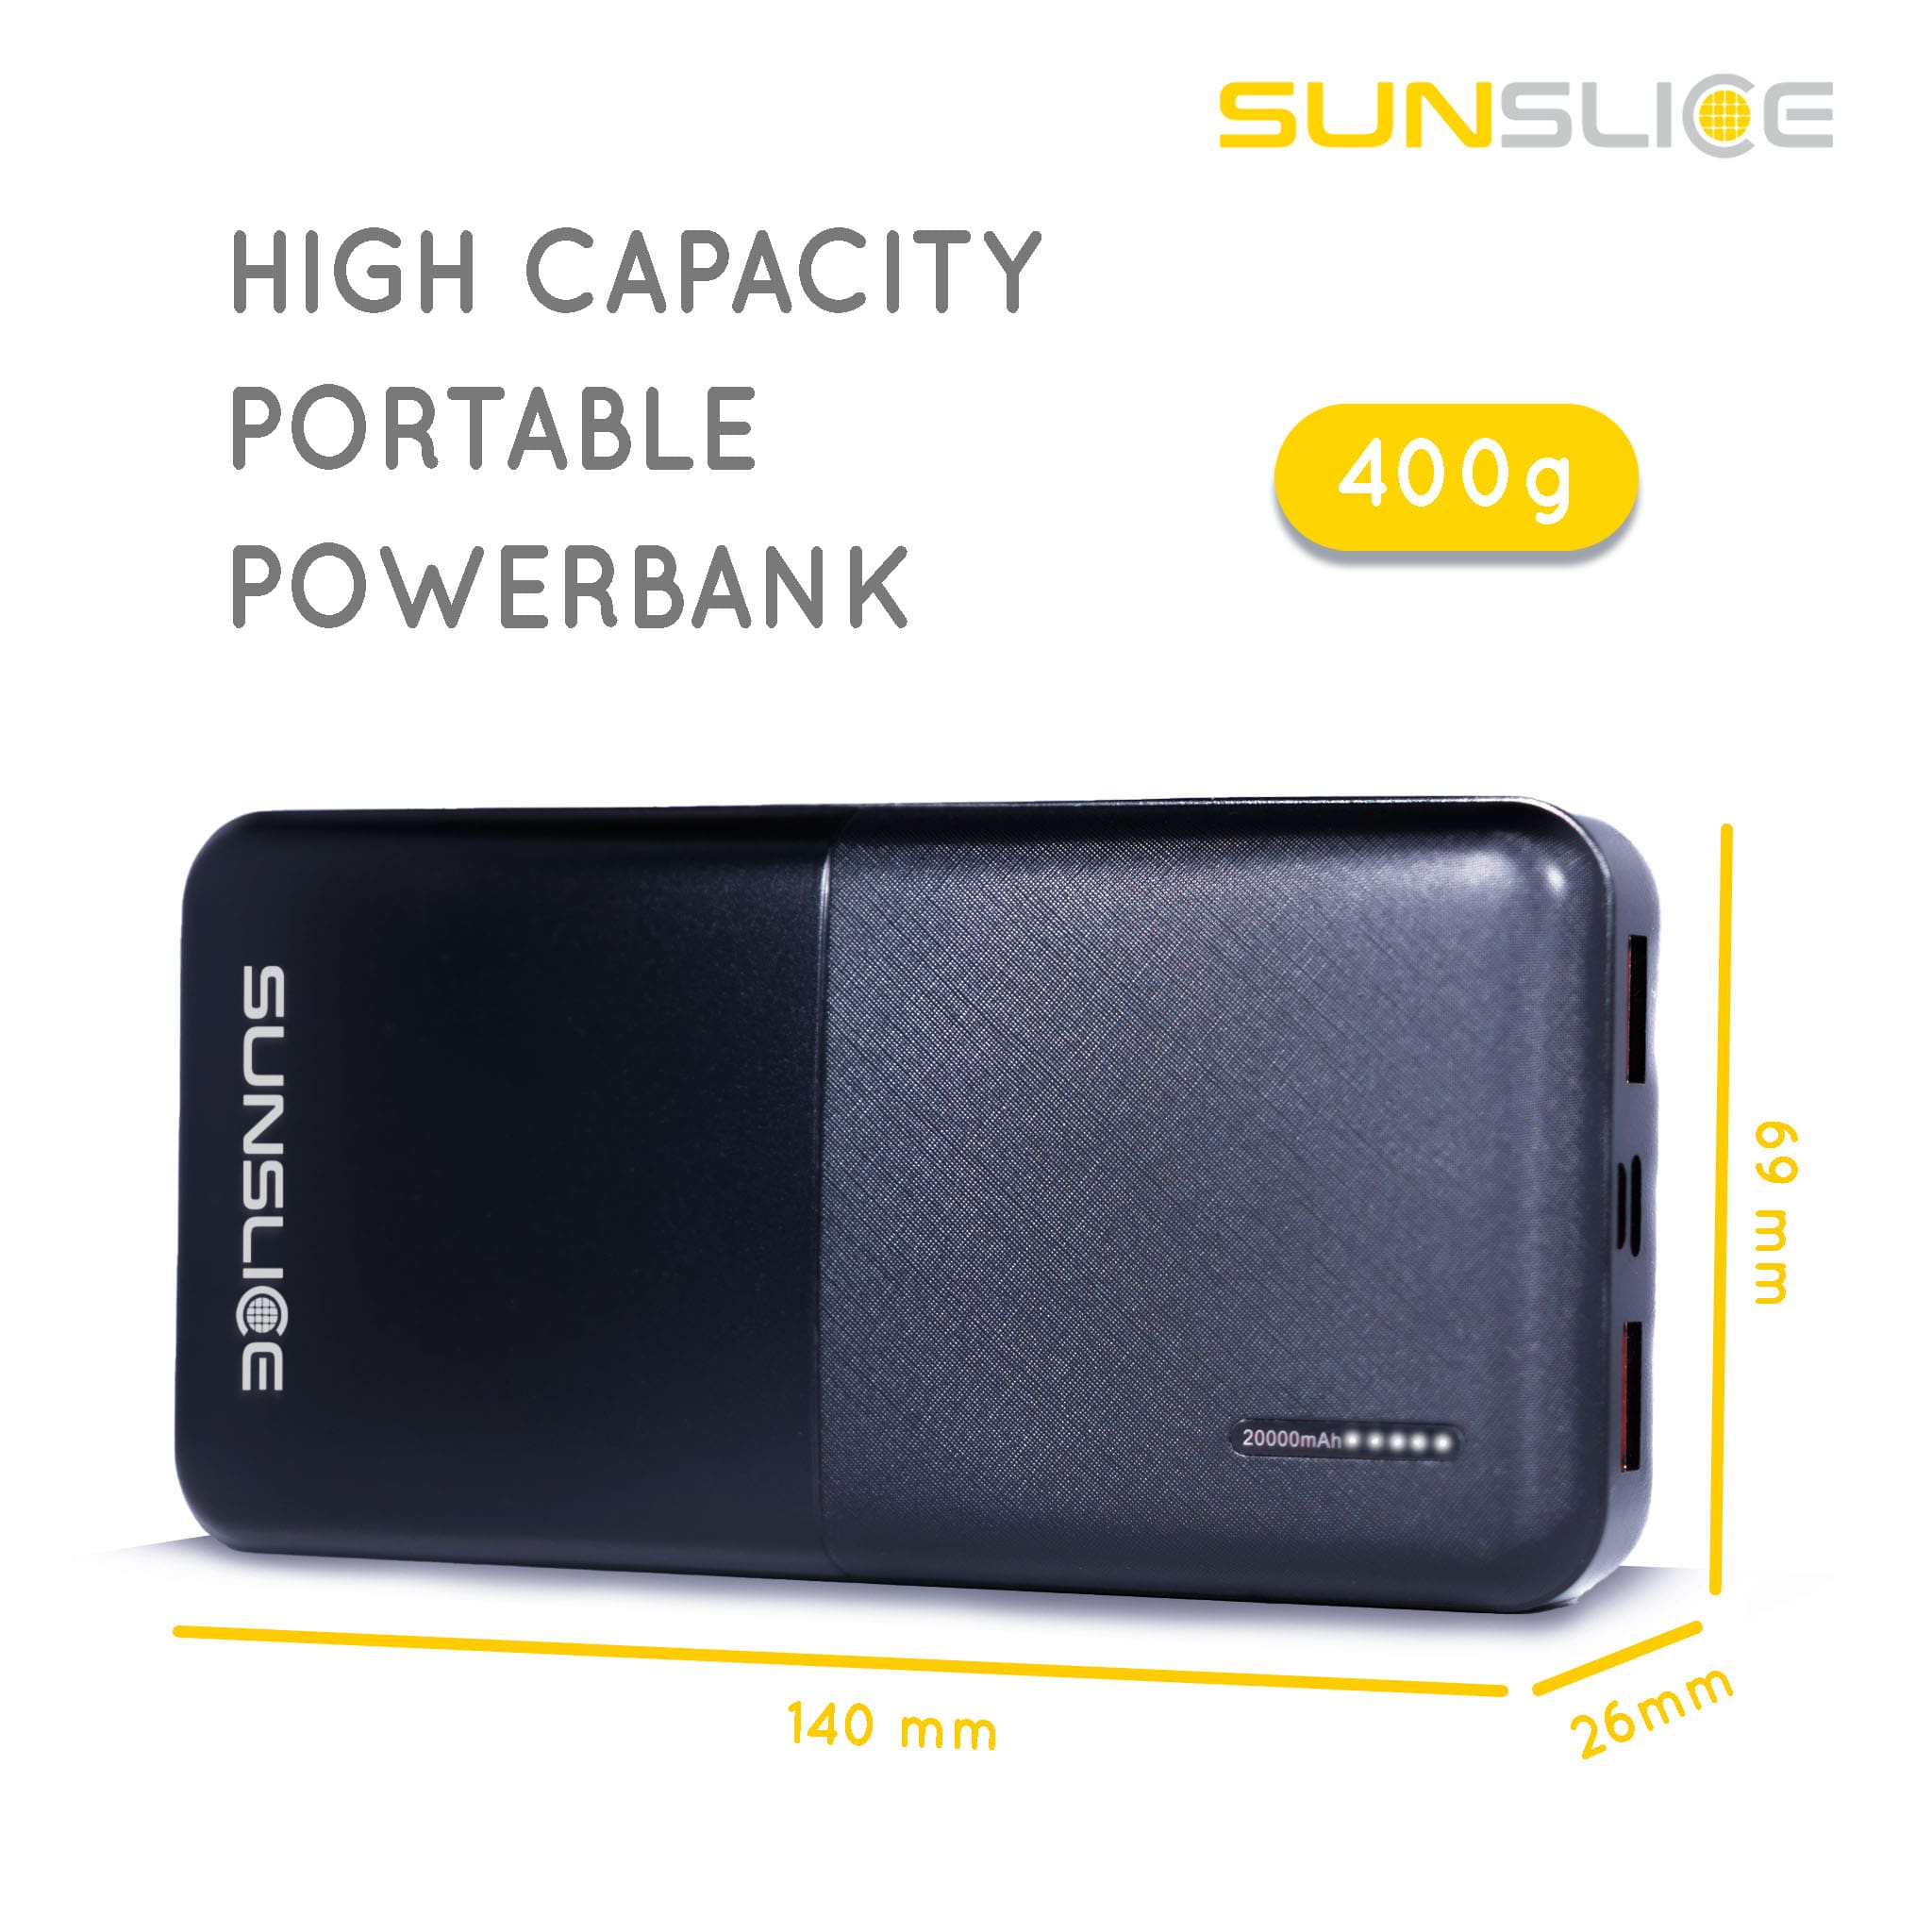 Power bank Gravity 20 size : 140 mm, 26 mm, 69 mm. Weight : 400g